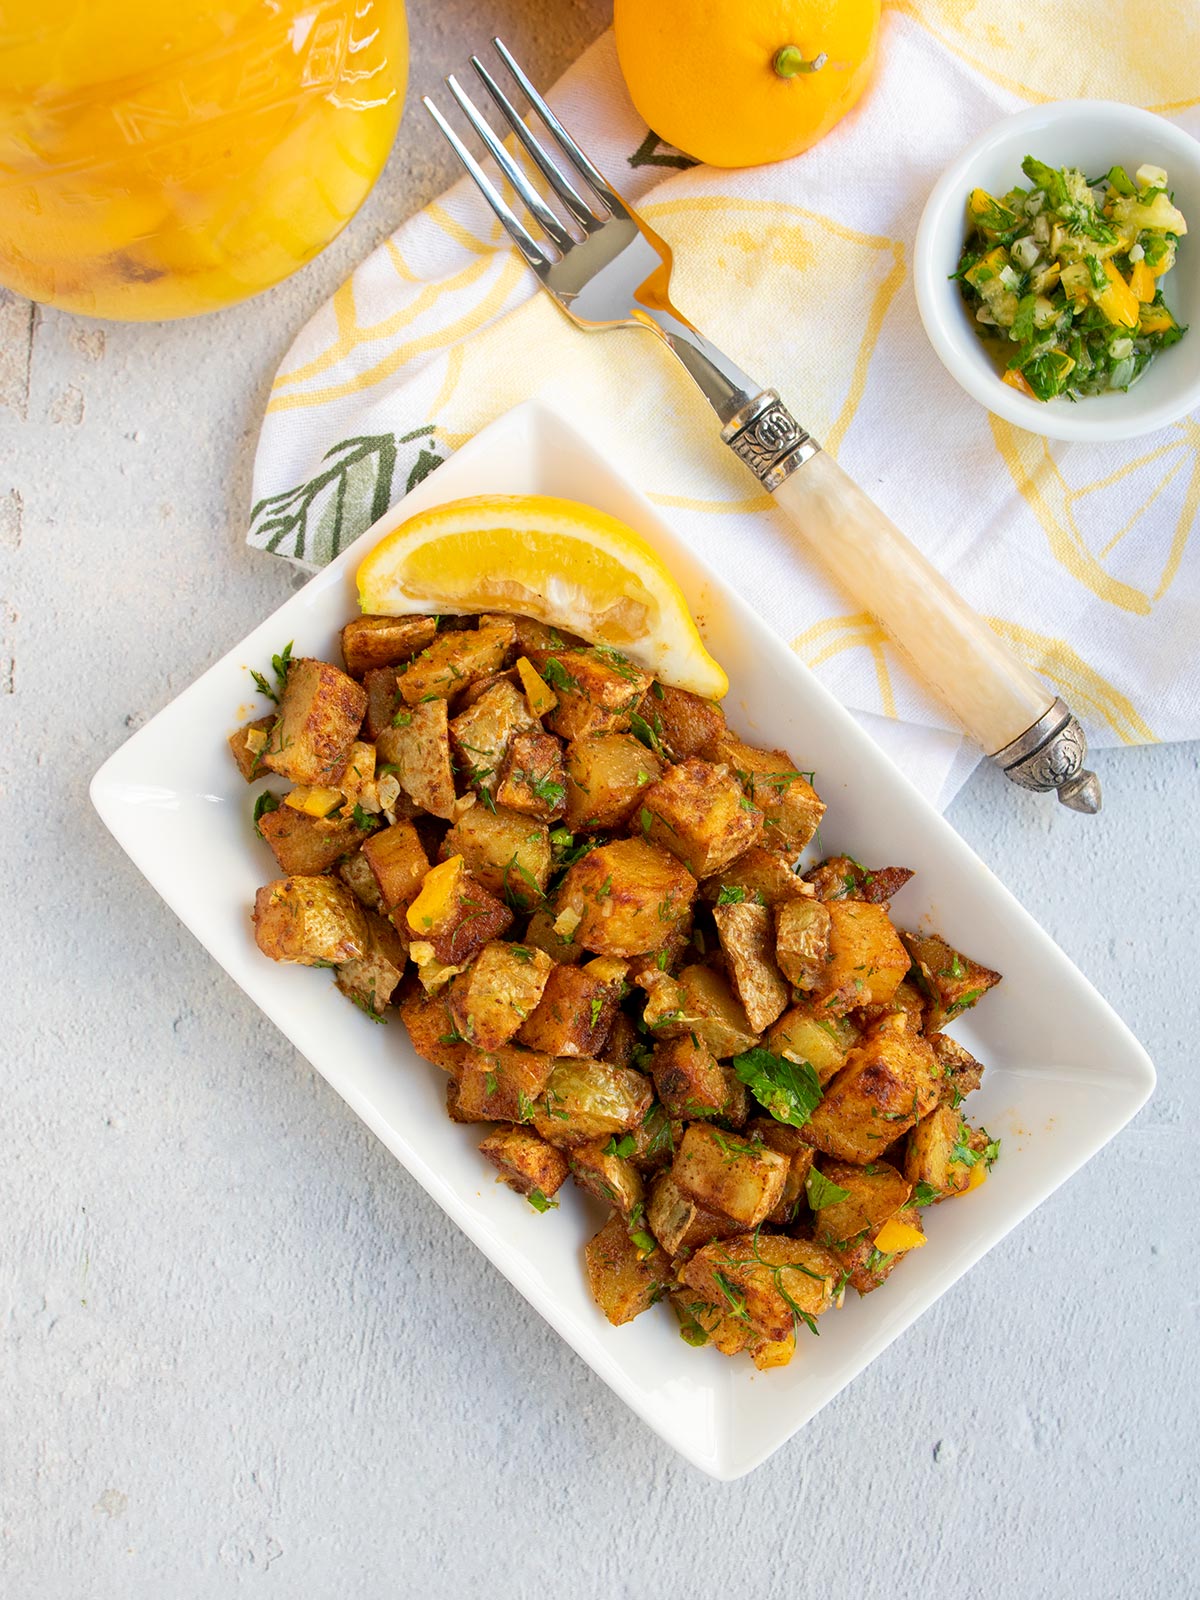 Roasted Harissa Potatoes with Preserved Lemon Herb topping on a white plate with sliced fresh lemon.